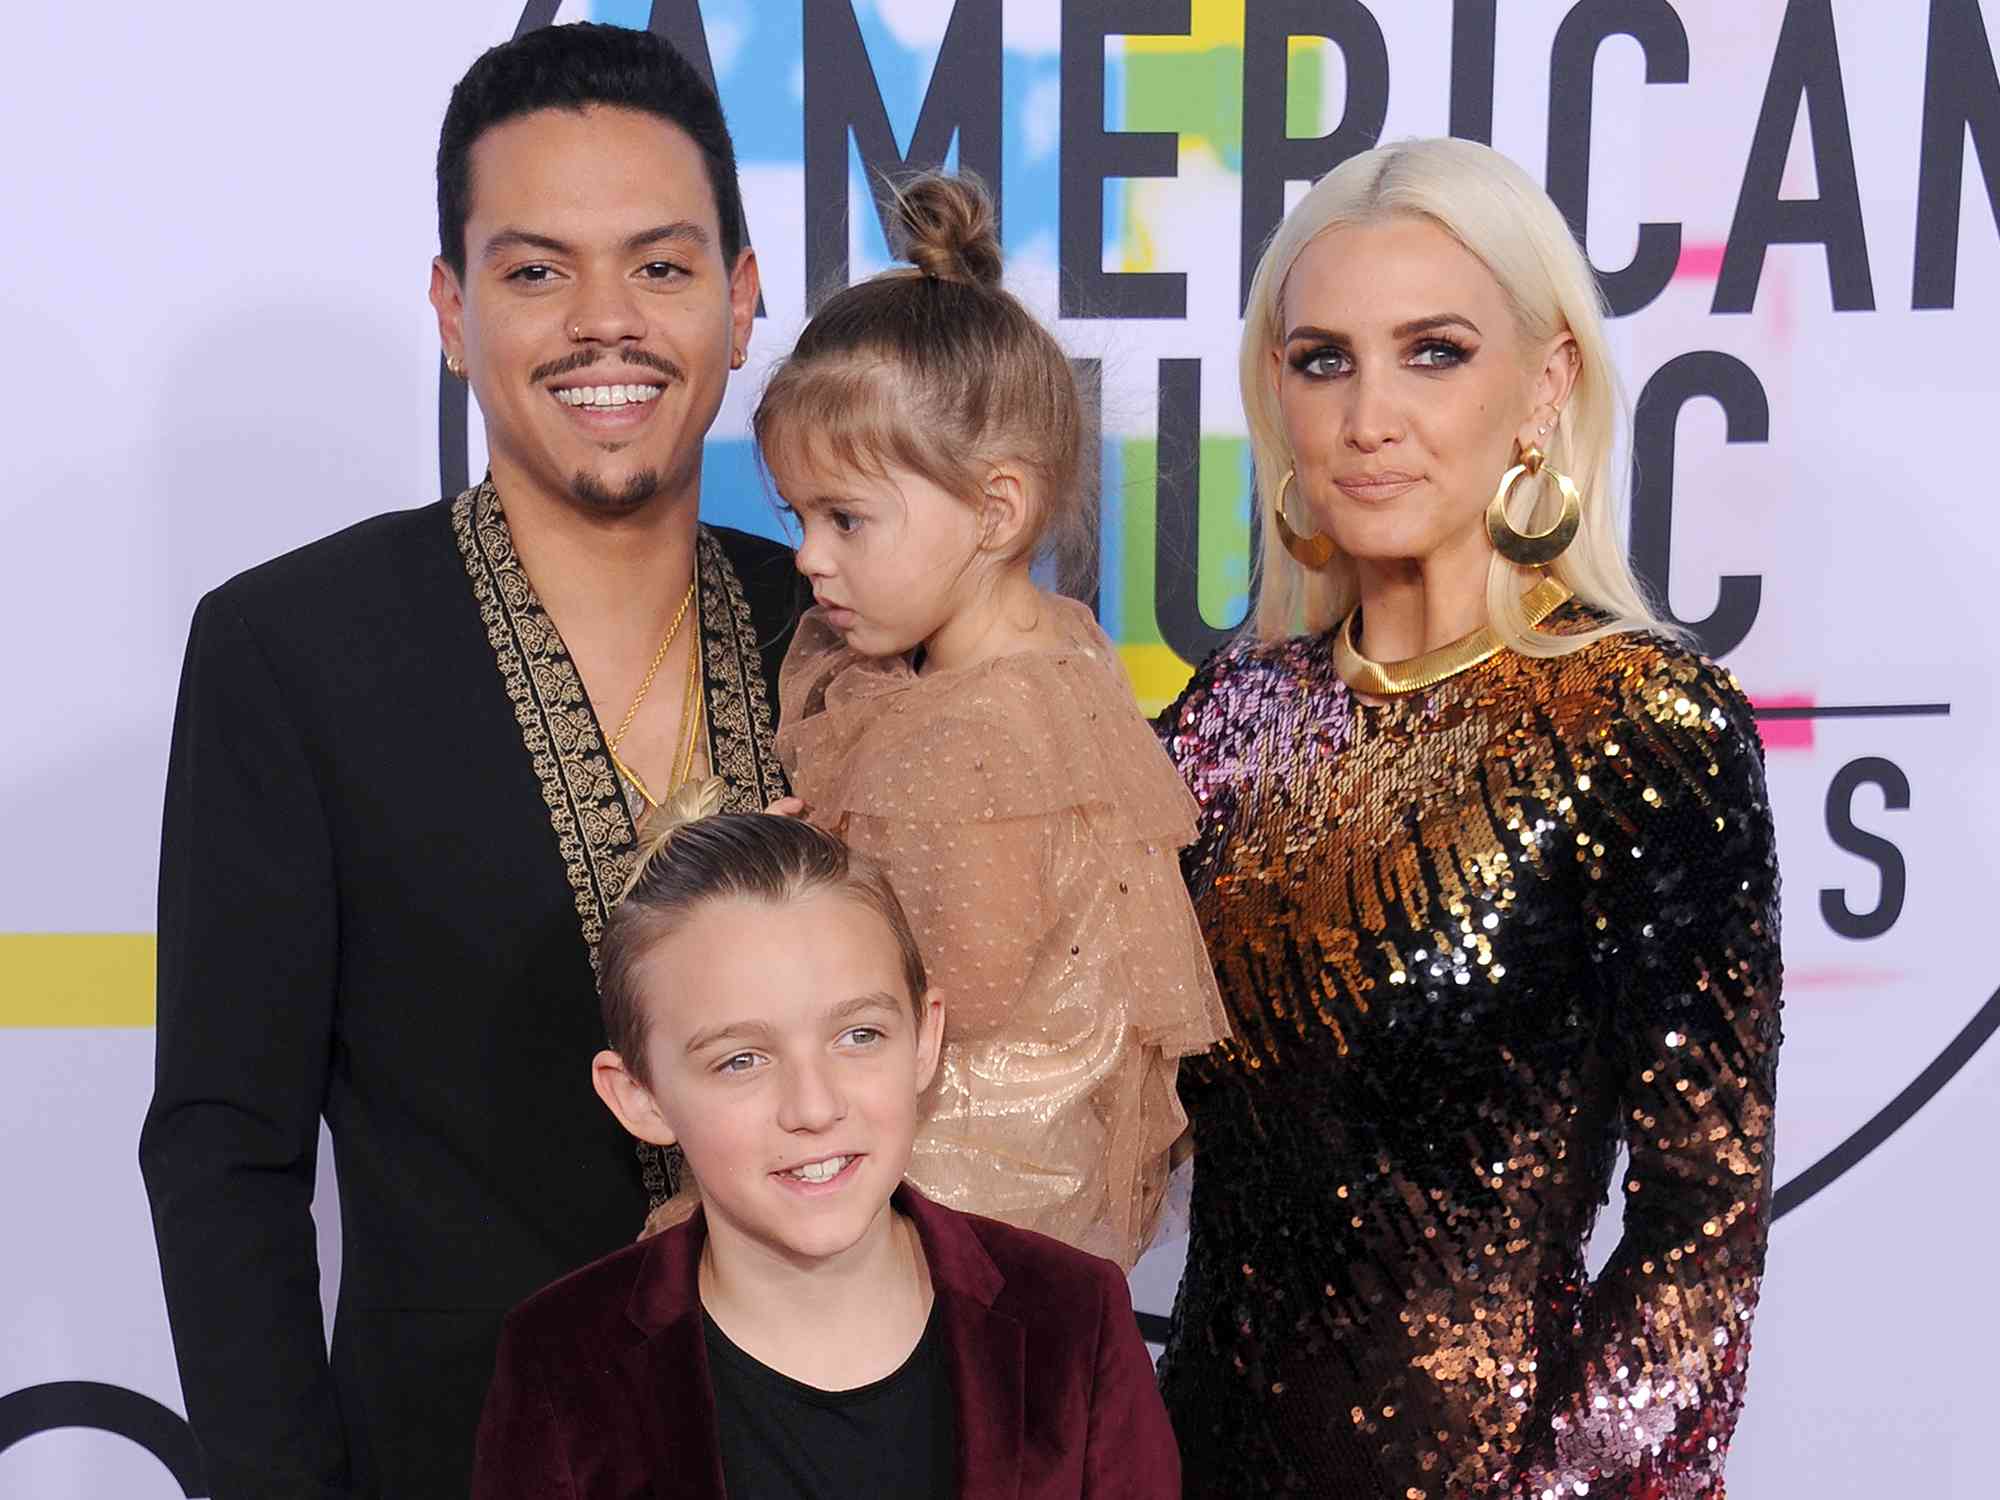 Evan Ross, Ashlee Simpson, Jagger Snow Ross and Bronx Mowgli Wentz arrive at the 2017 American Music Awards at Microsoft Theater on November 19, 2017 in Los Angeles, California